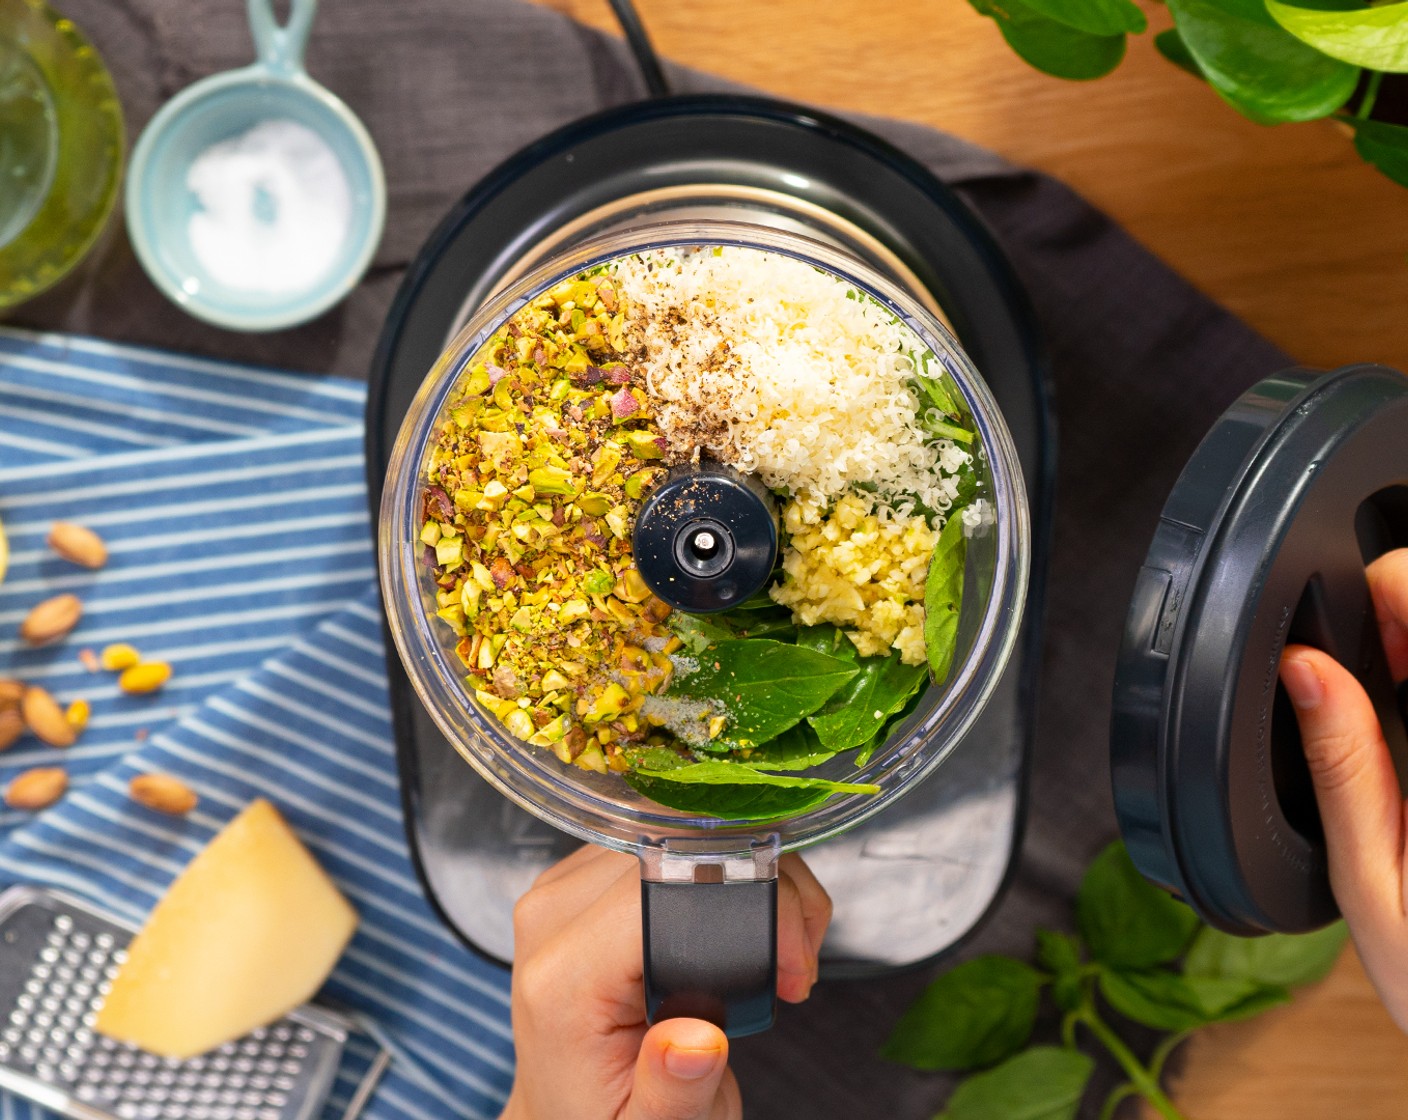 step 4 Pulse Fresh Basil Leaves (2 cups), Grated Parmesan Cheese (1/3 cup), Roasted Salted Pistachios (1/2 cup), Garlic (1 clove), Salt (1/2 tsp), and Ground Black Pepper (1/2 tsp) in a food processor until finely chopped.